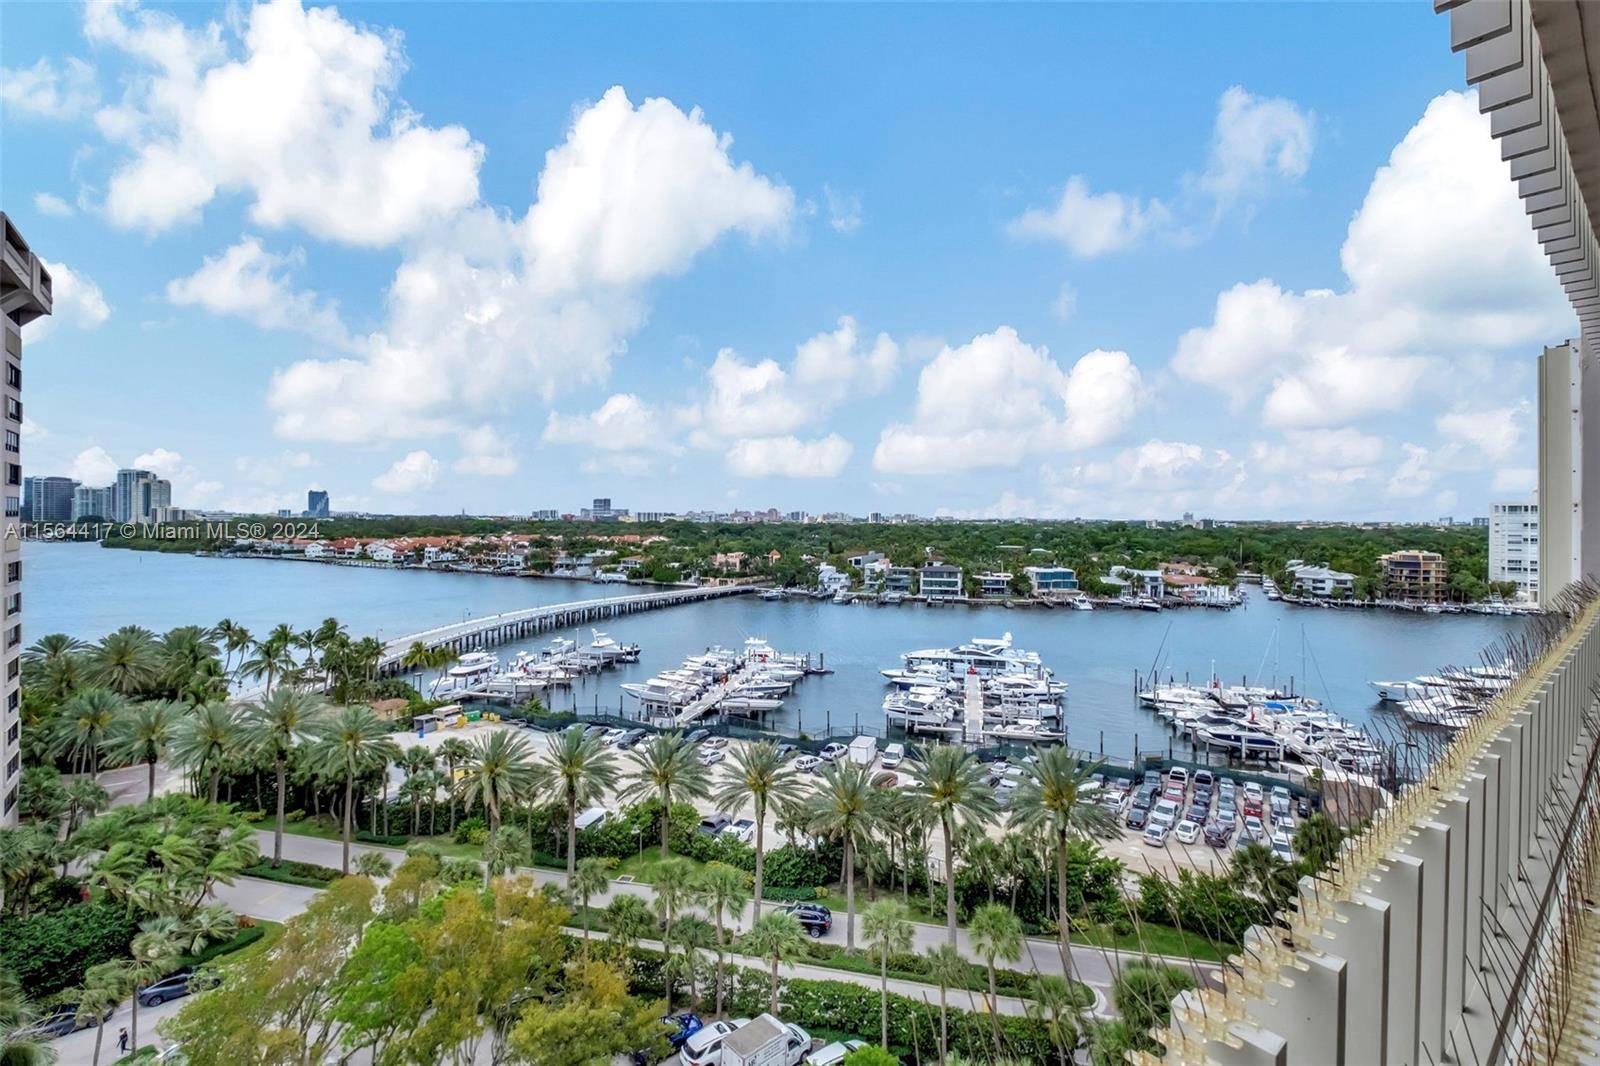 Lovely 2bd 2ba situated in a tropical, 20 acre private island, surrounded by Biscayne Bay, just off the Coconut Grove mainland.